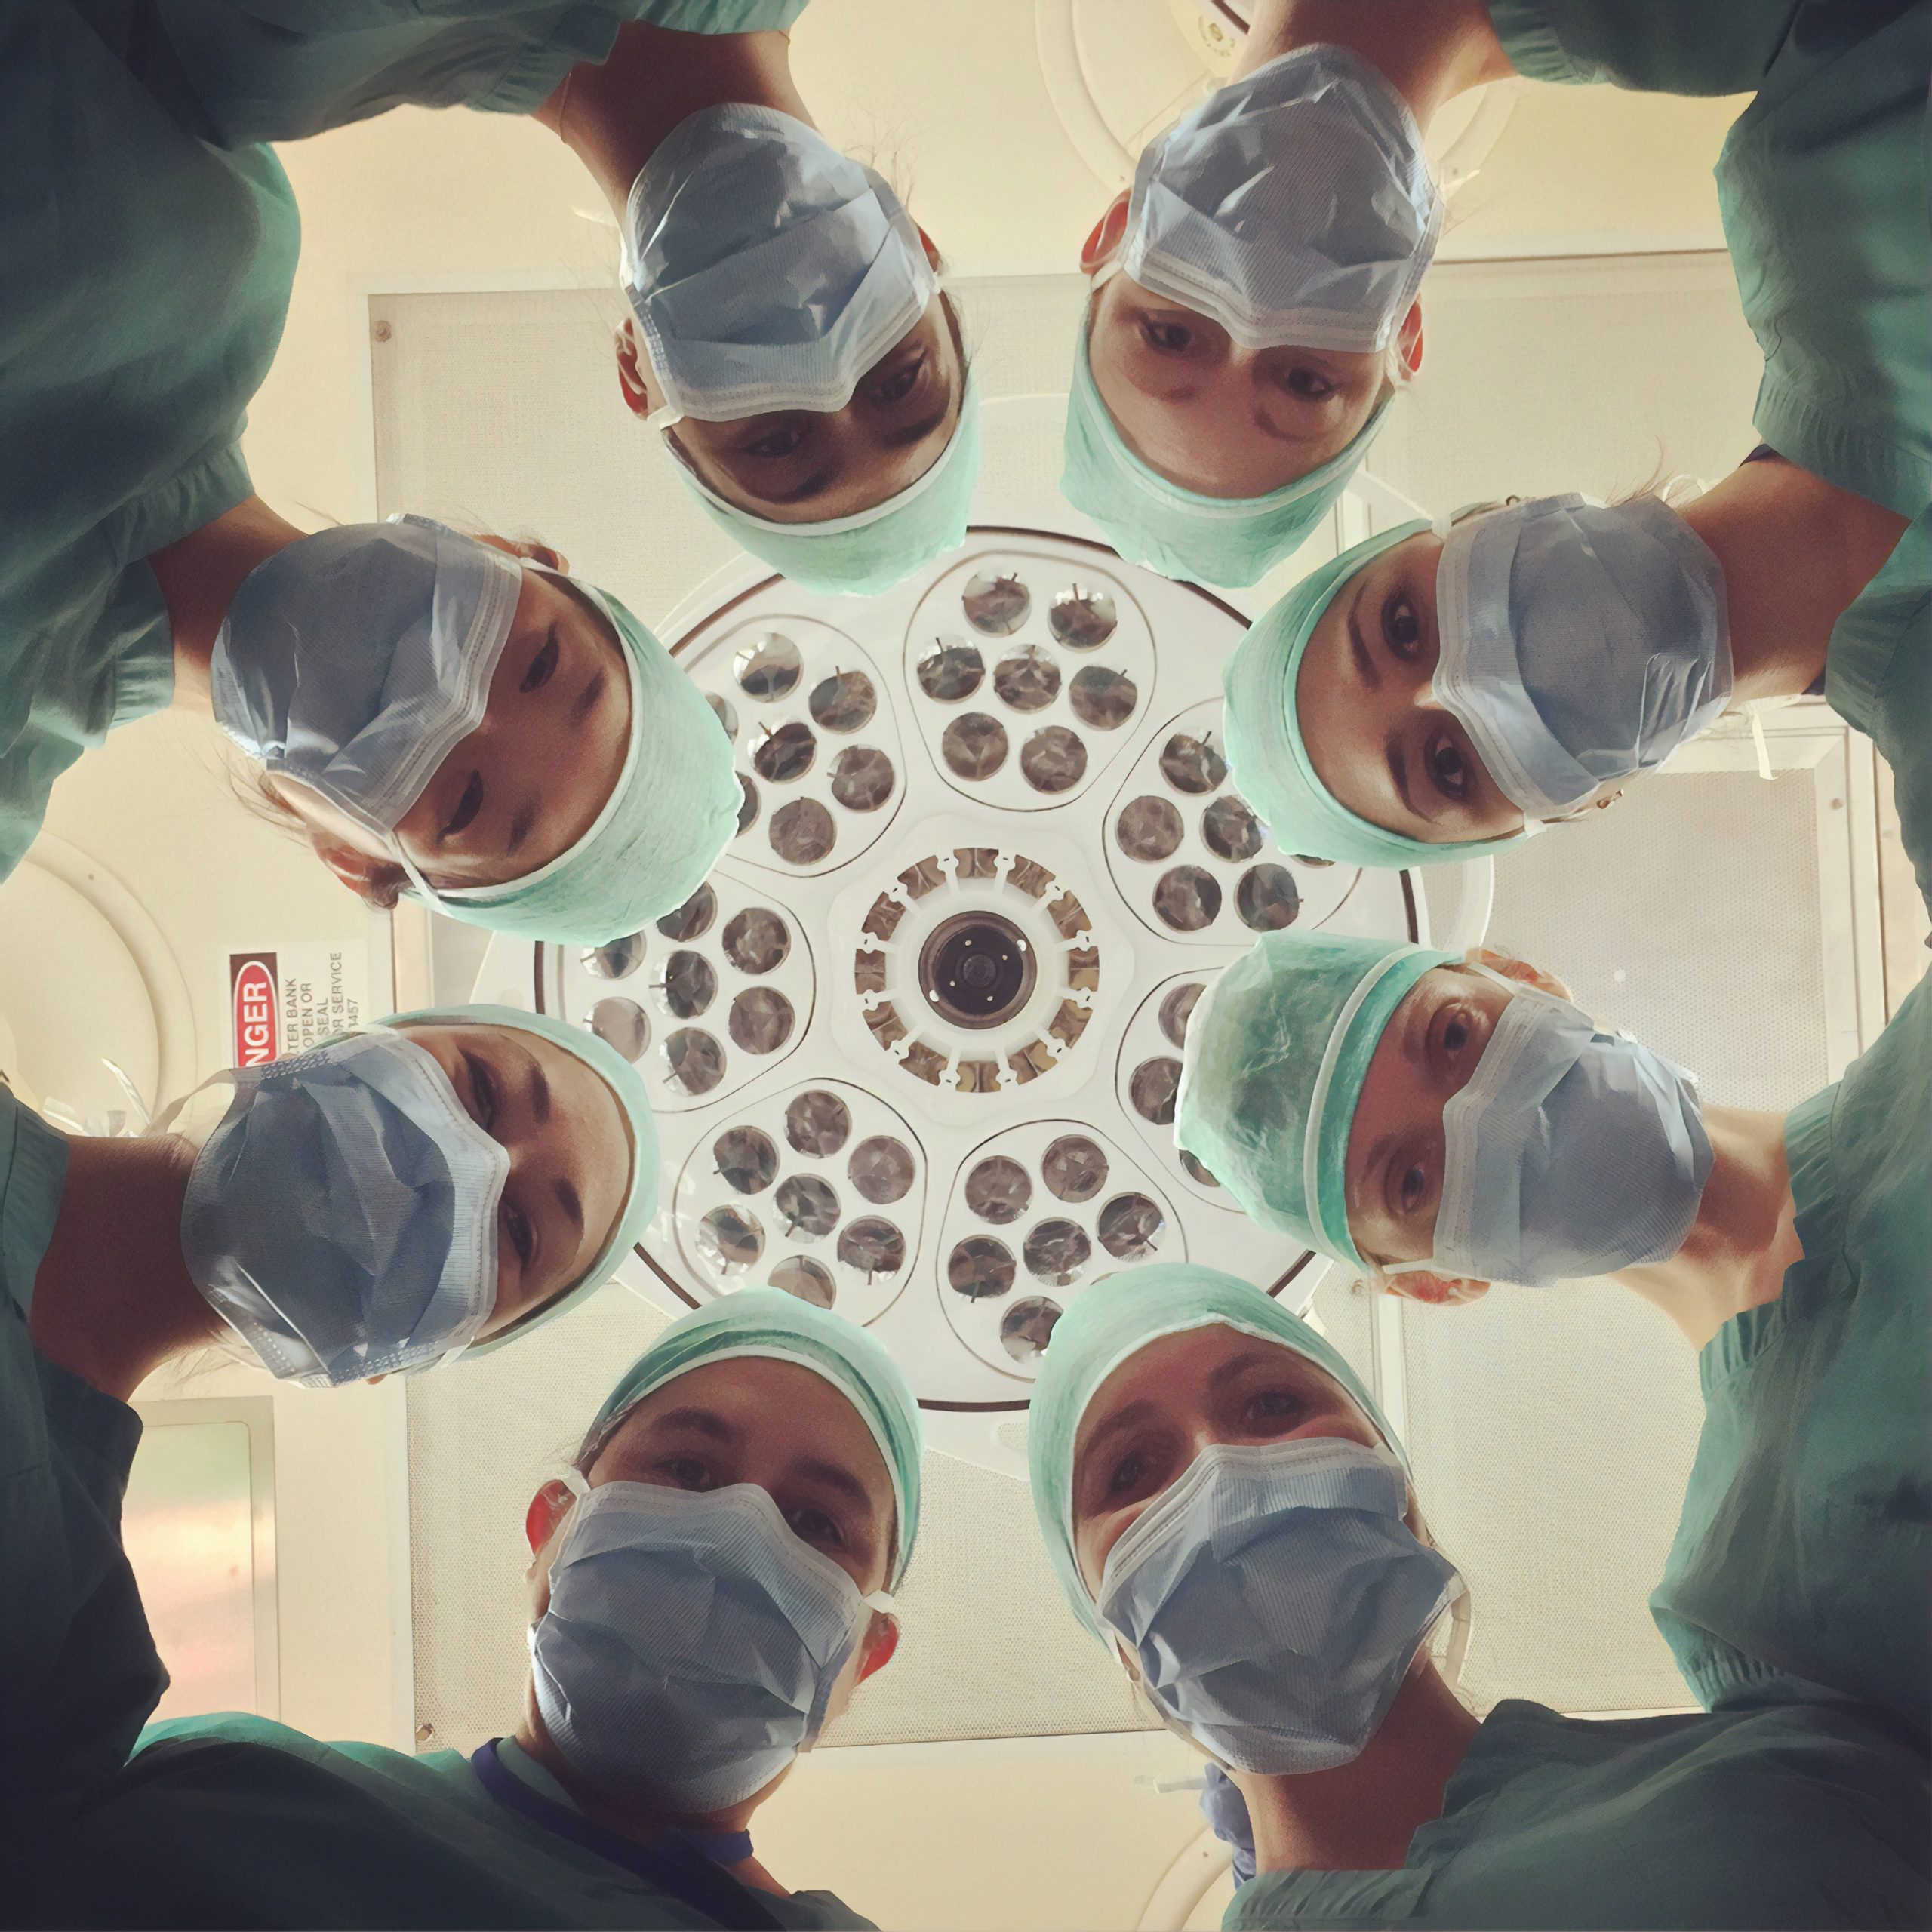 masked doctors in scrubs stand in a circle and peer down at the camera